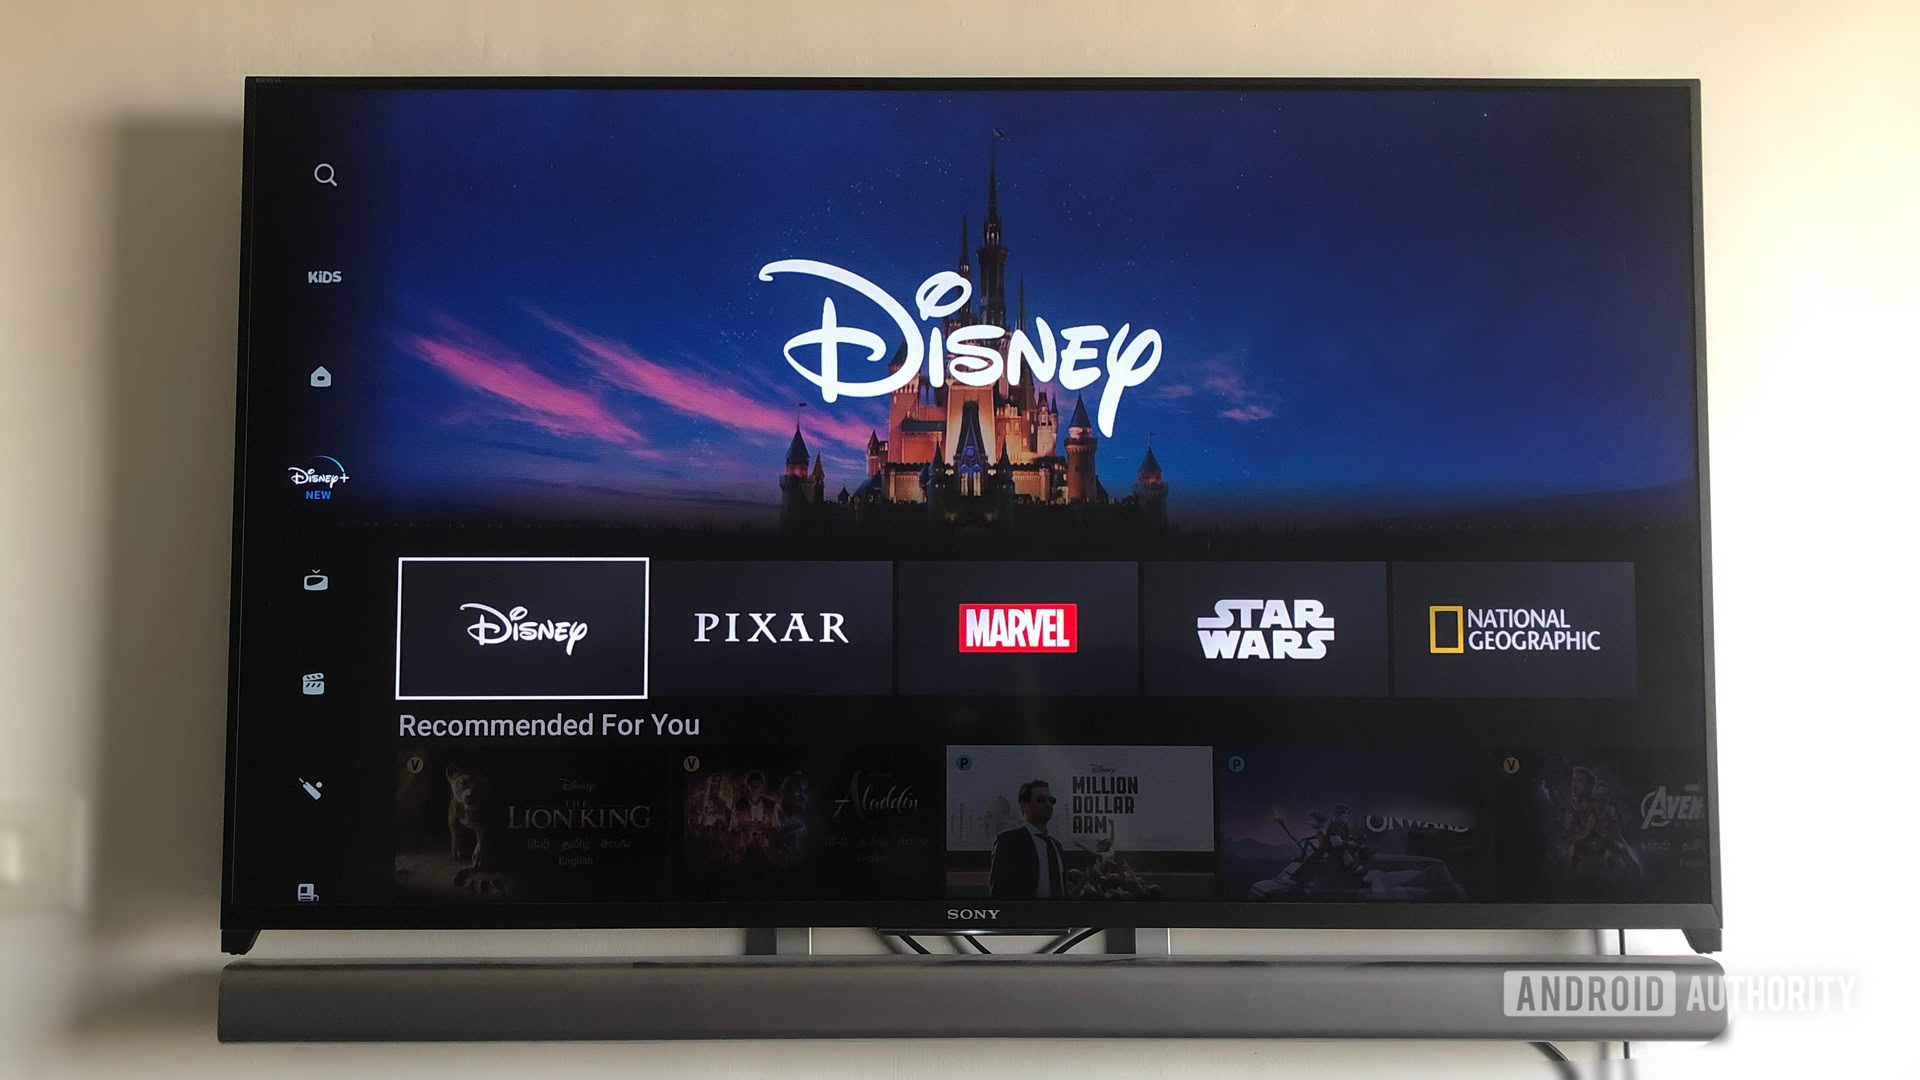 Can you watch Disney Plus on Android TV or box? Here's the answer